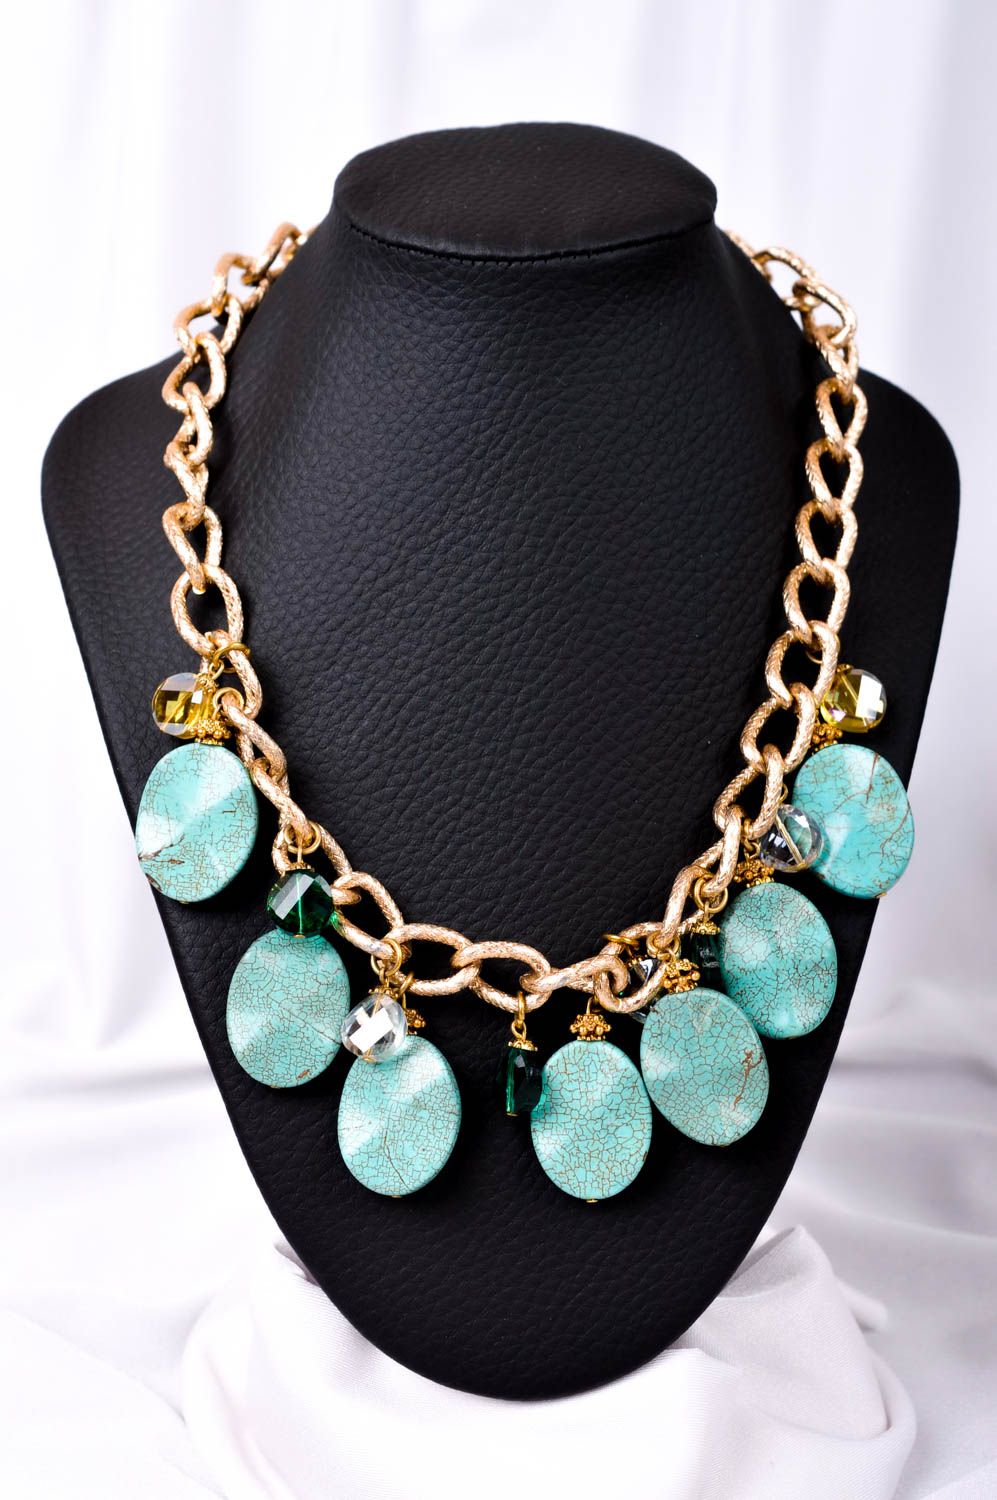 Handmade necklace designer necklace with stones gift ideas women accessory photo 1